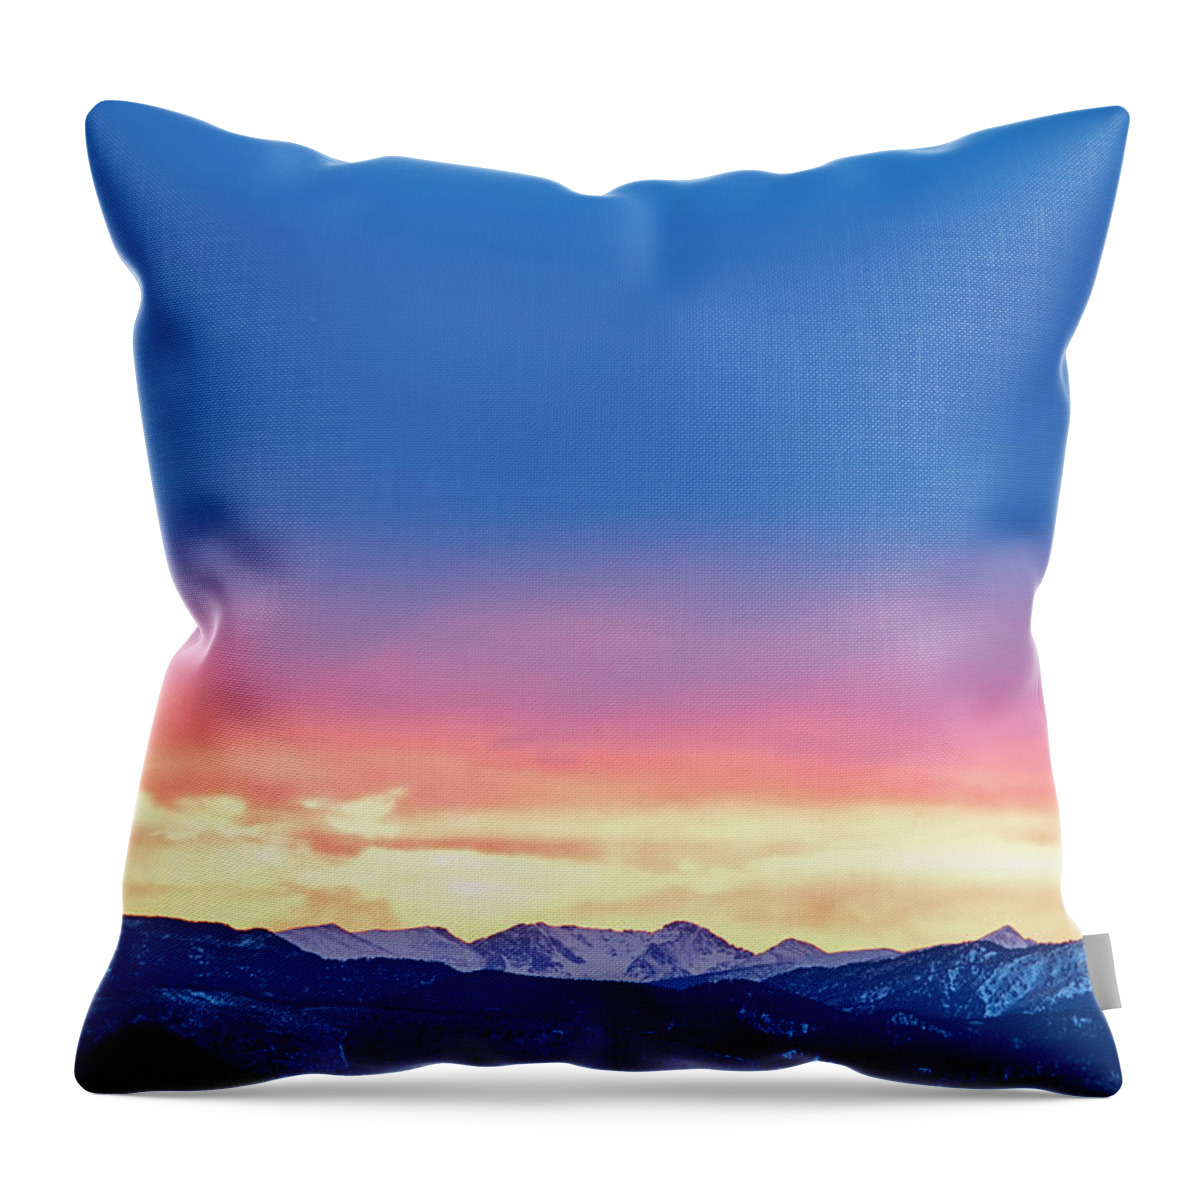 Winter Throw Pillow featuring the photograph Rocky Mountain Sunset Clouds Burning Layers by James BO Insogna